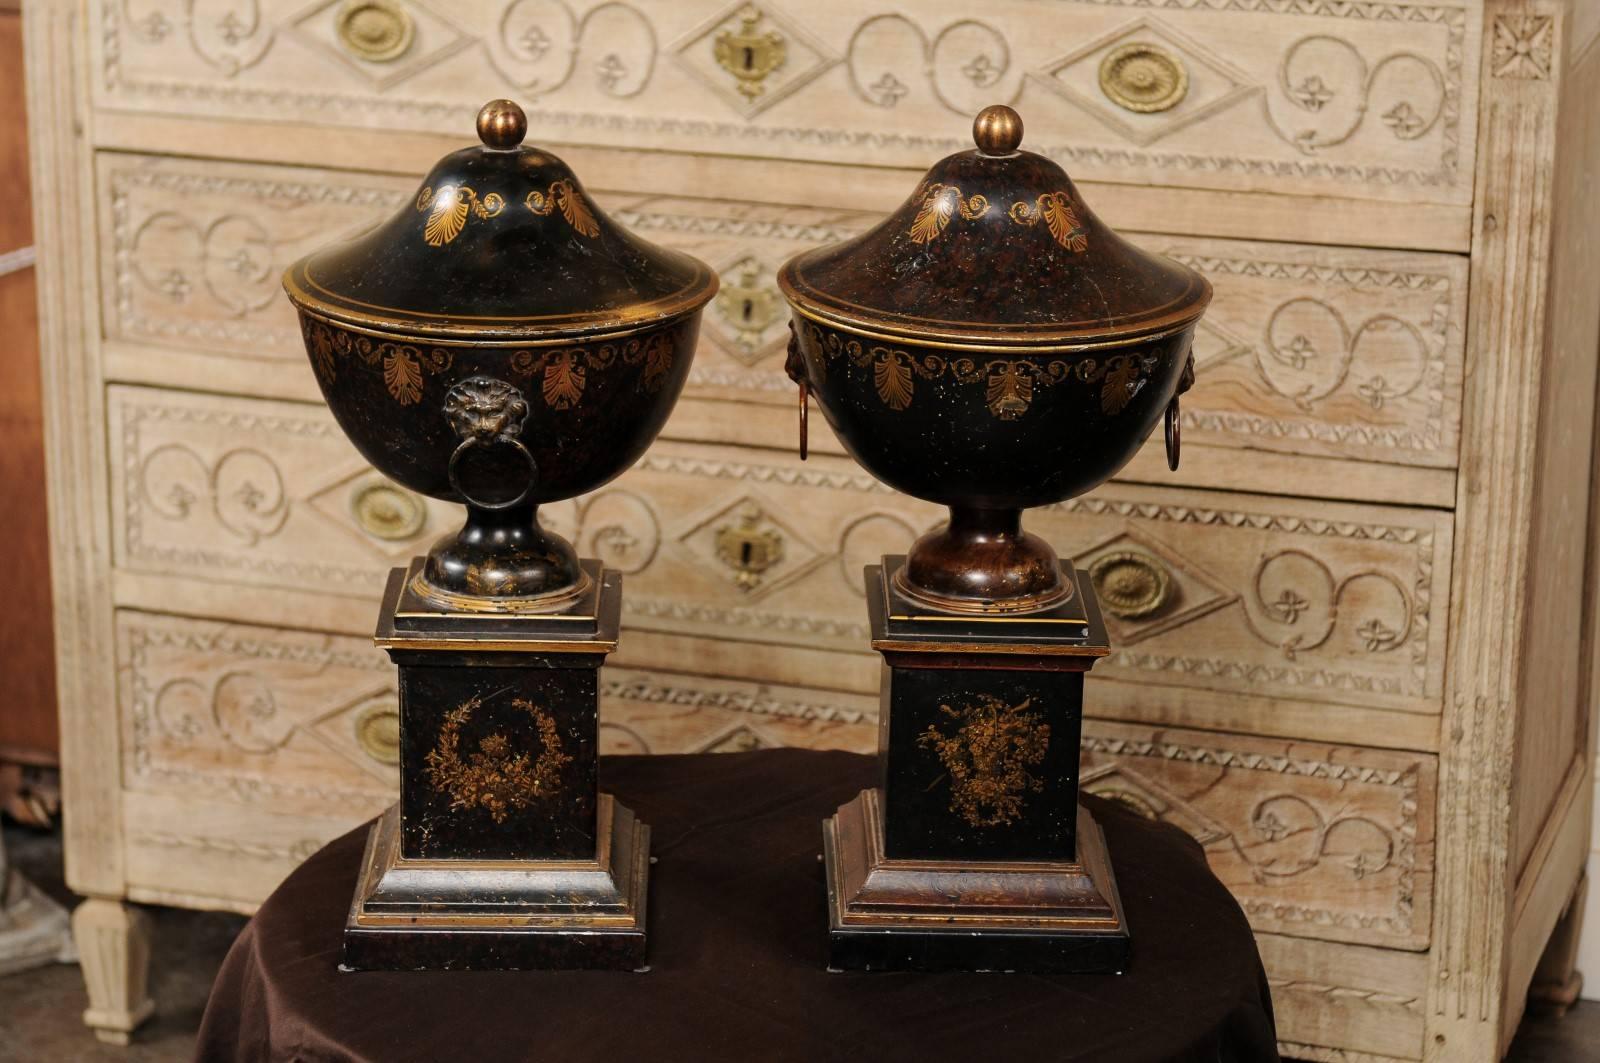 Pair of French 1920s Tole Black Tole Urns on Pedestals with Gilded Accents 2